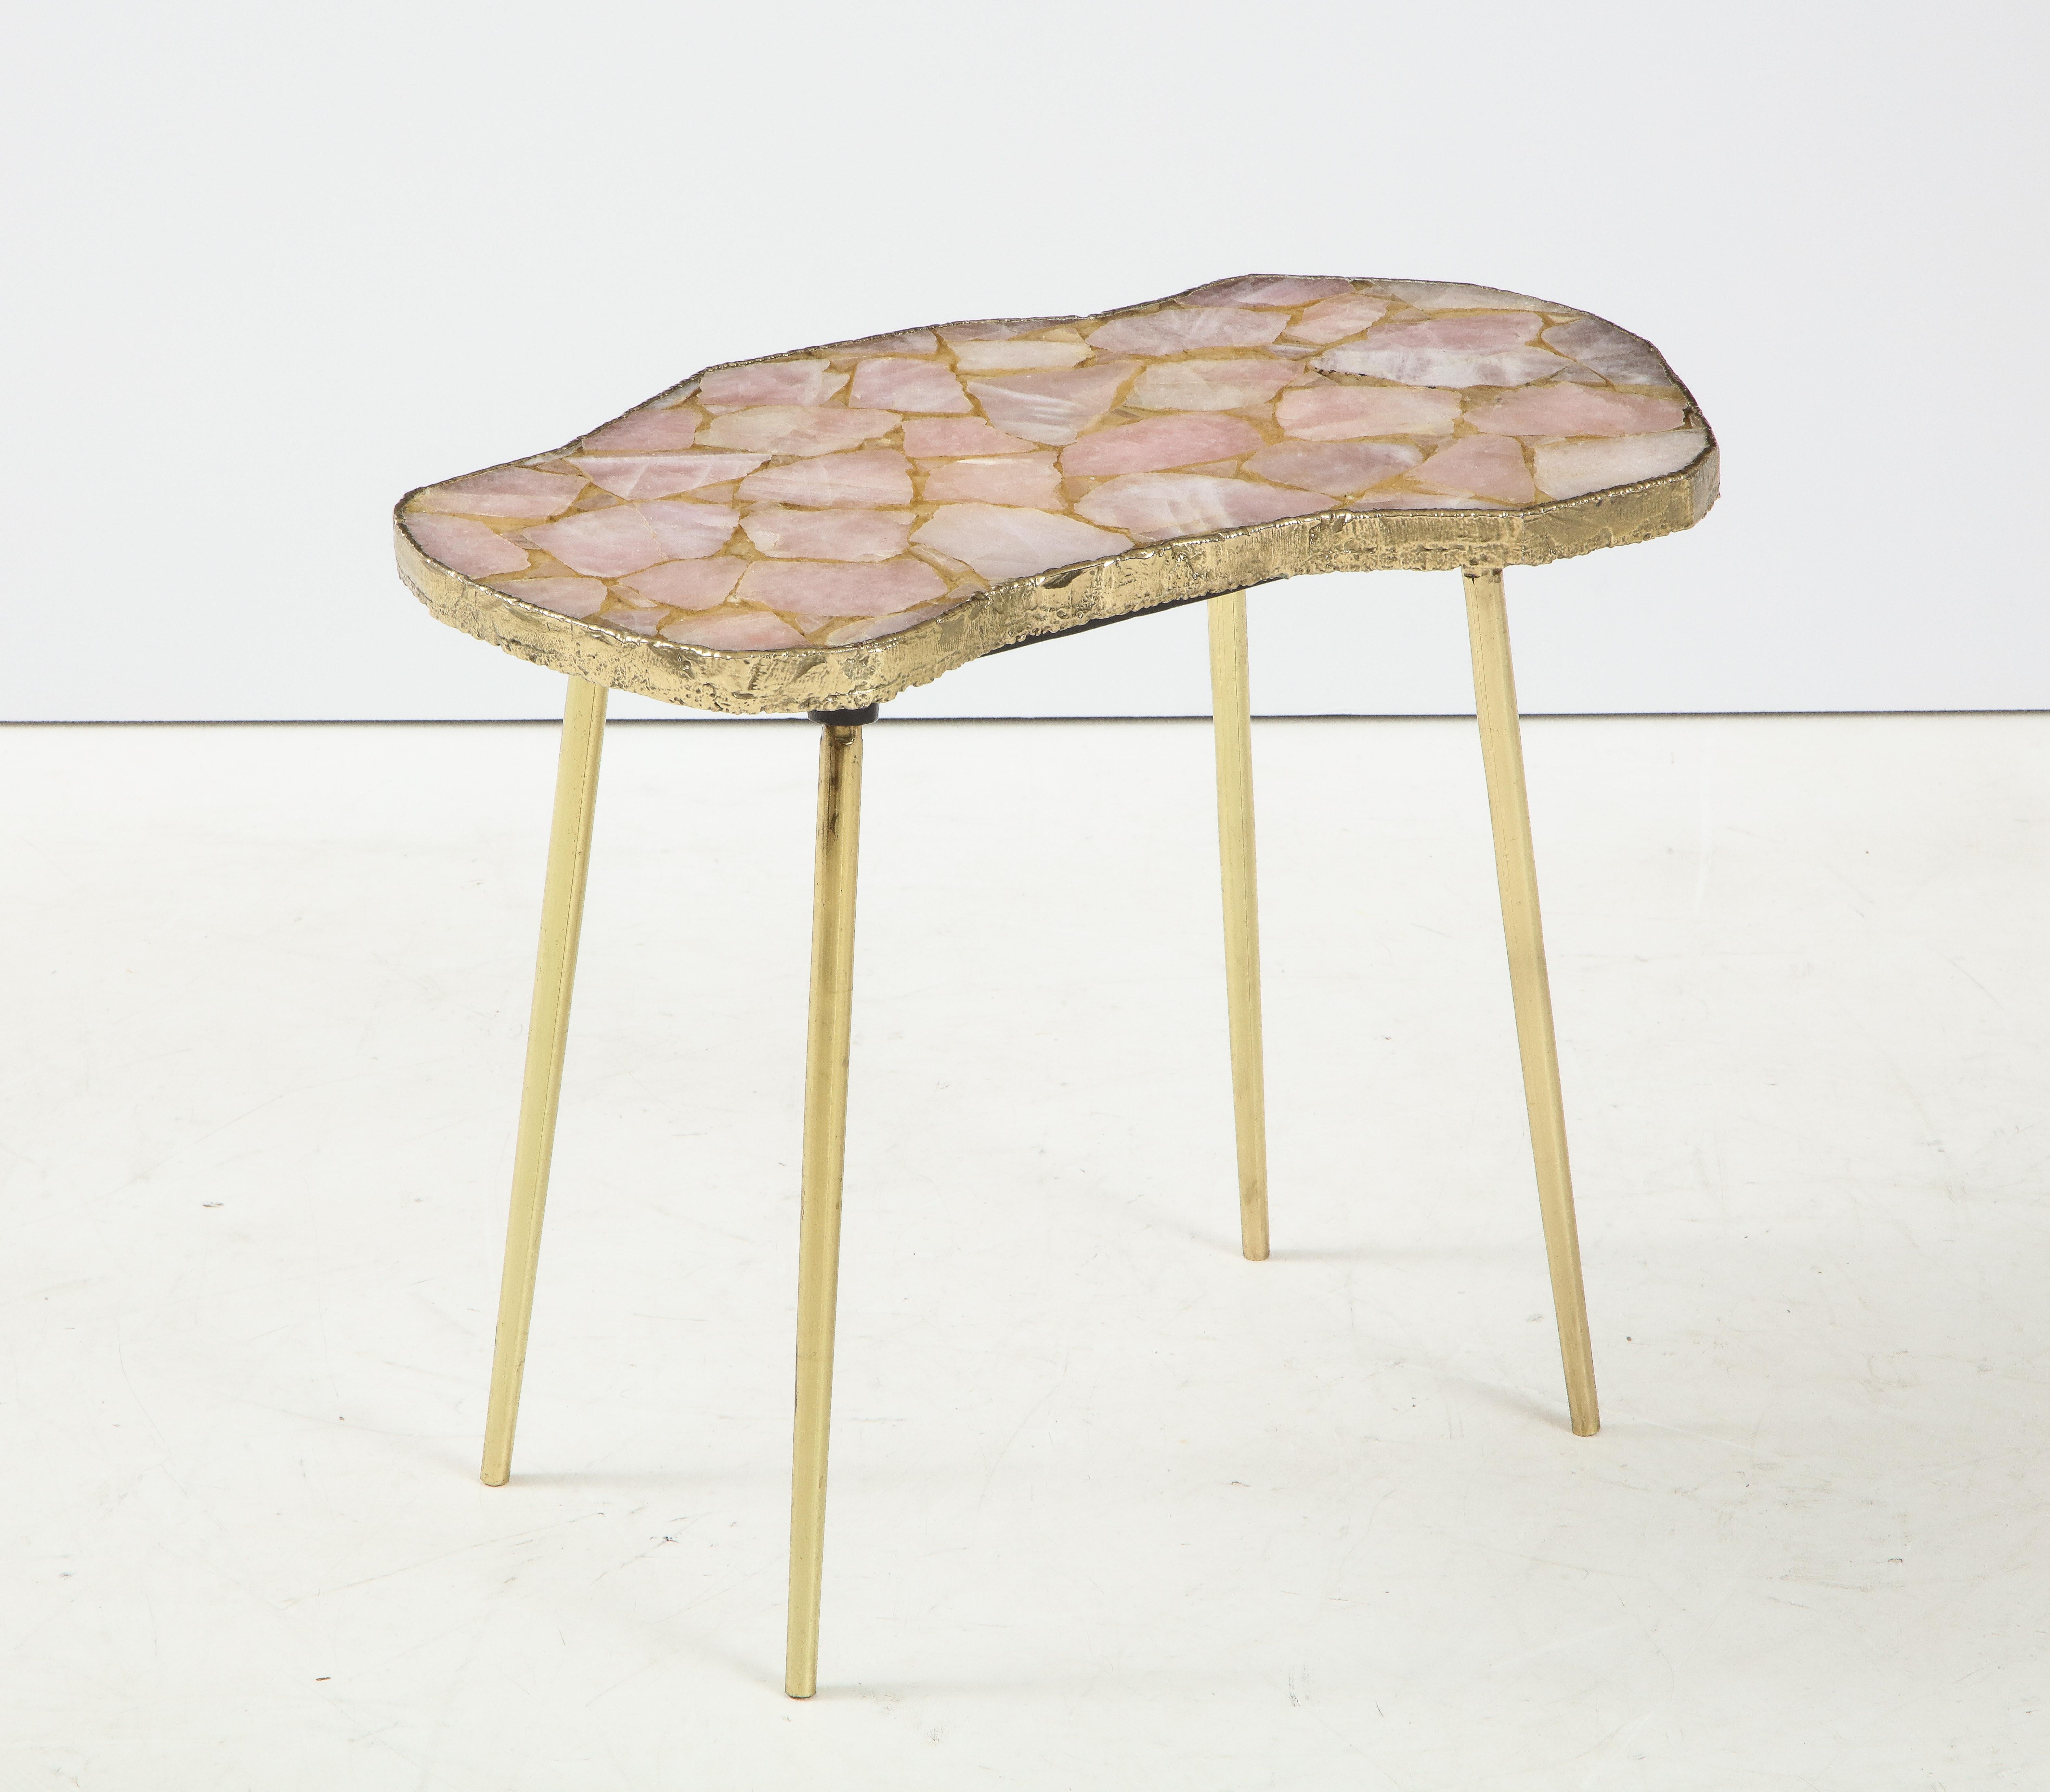 Organic modern sidetable with rose quartz specimen top with a gilded rough hewn edge and brass legs.